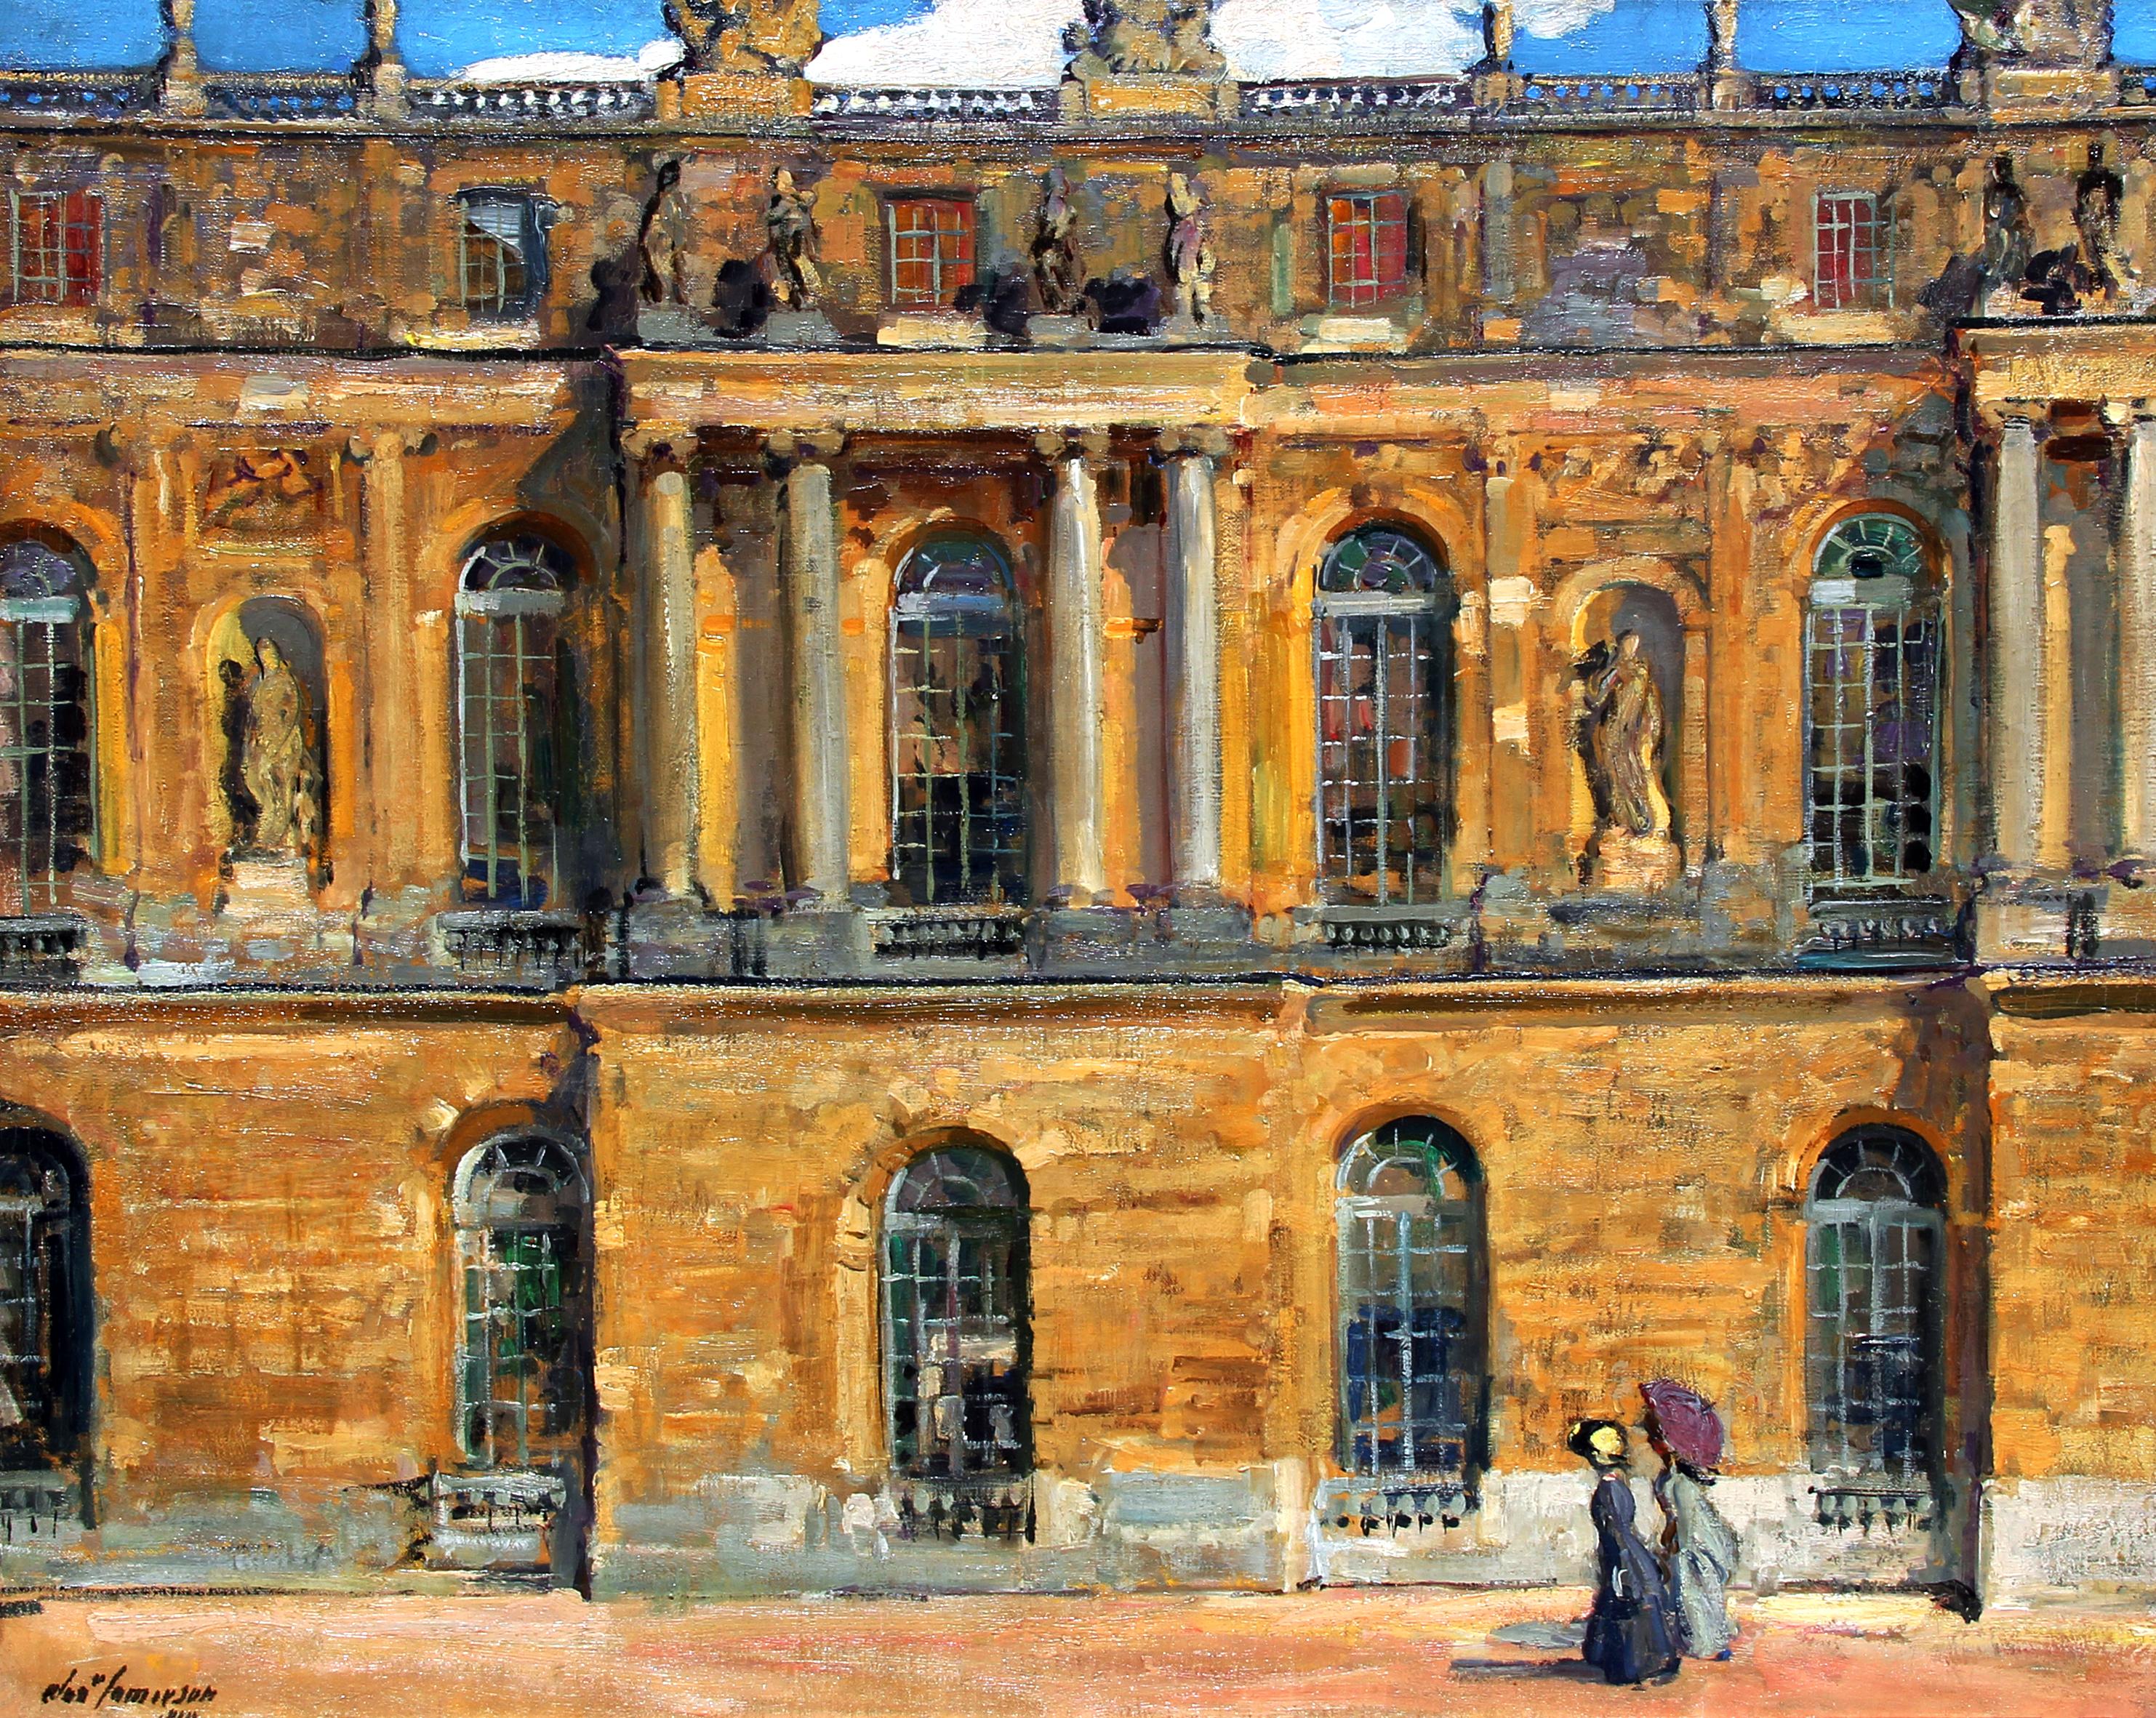 ALEXANDER JAMIESON
British, 1873–1937

Palais de Versailles

Signed and dated 1910
Oil on canvas
25 x 31¼ inches (63.5 x 79.3 cm)
Framed: 30½ x 37 inches (77.5 x 94 cm)

Provenance
Private Collection, New York